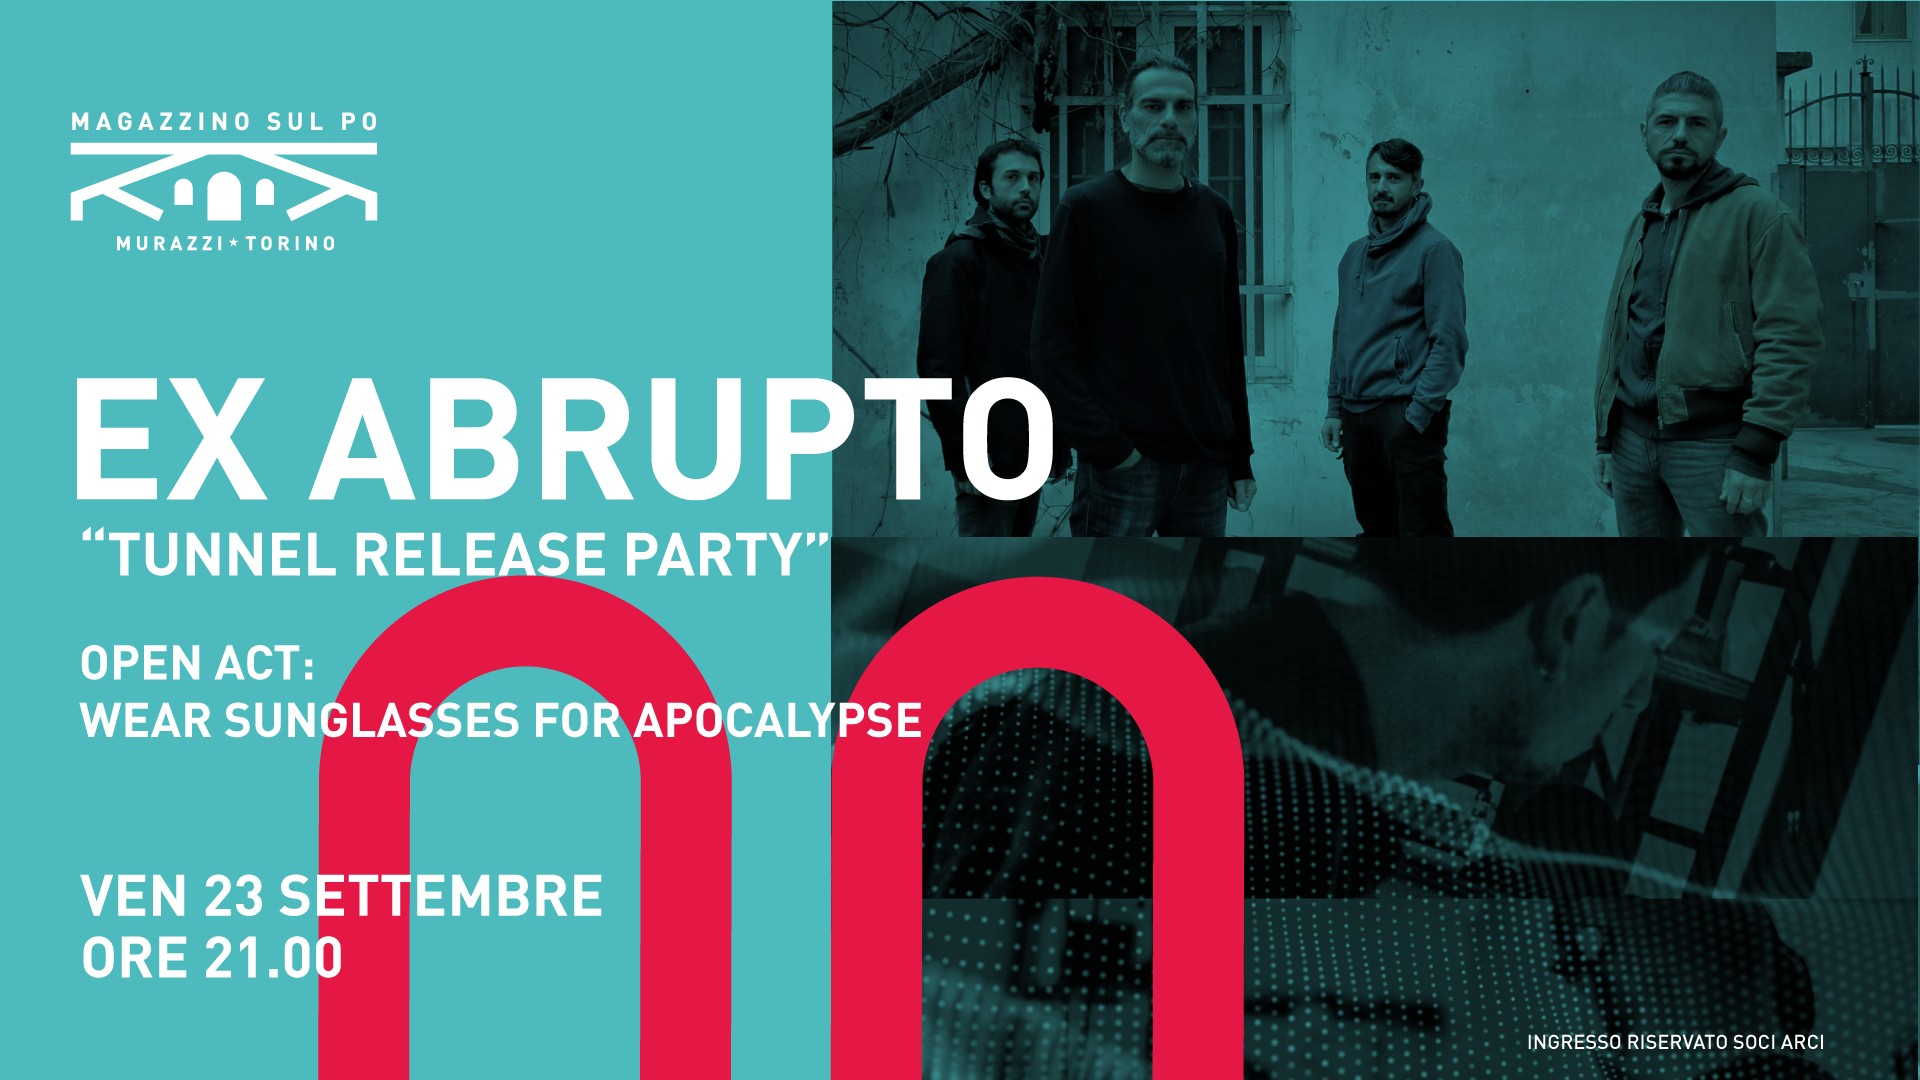 Ex Abrupto "Tunnel" Release Party